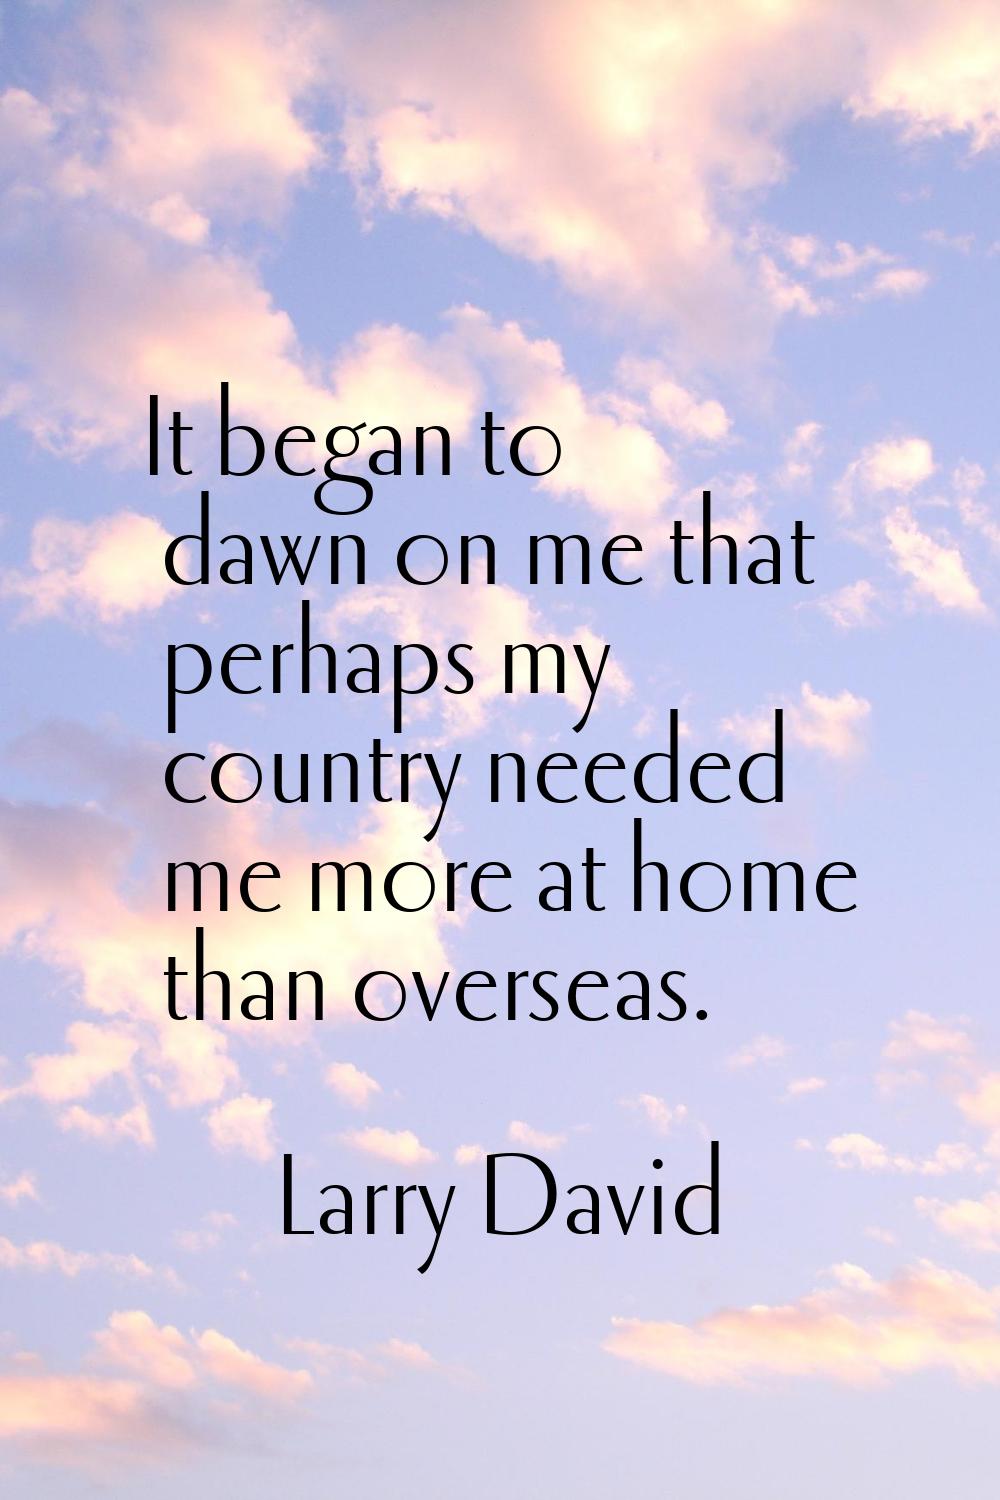 It began to dawn on me that perhaps my country needed me more at home than overseas.